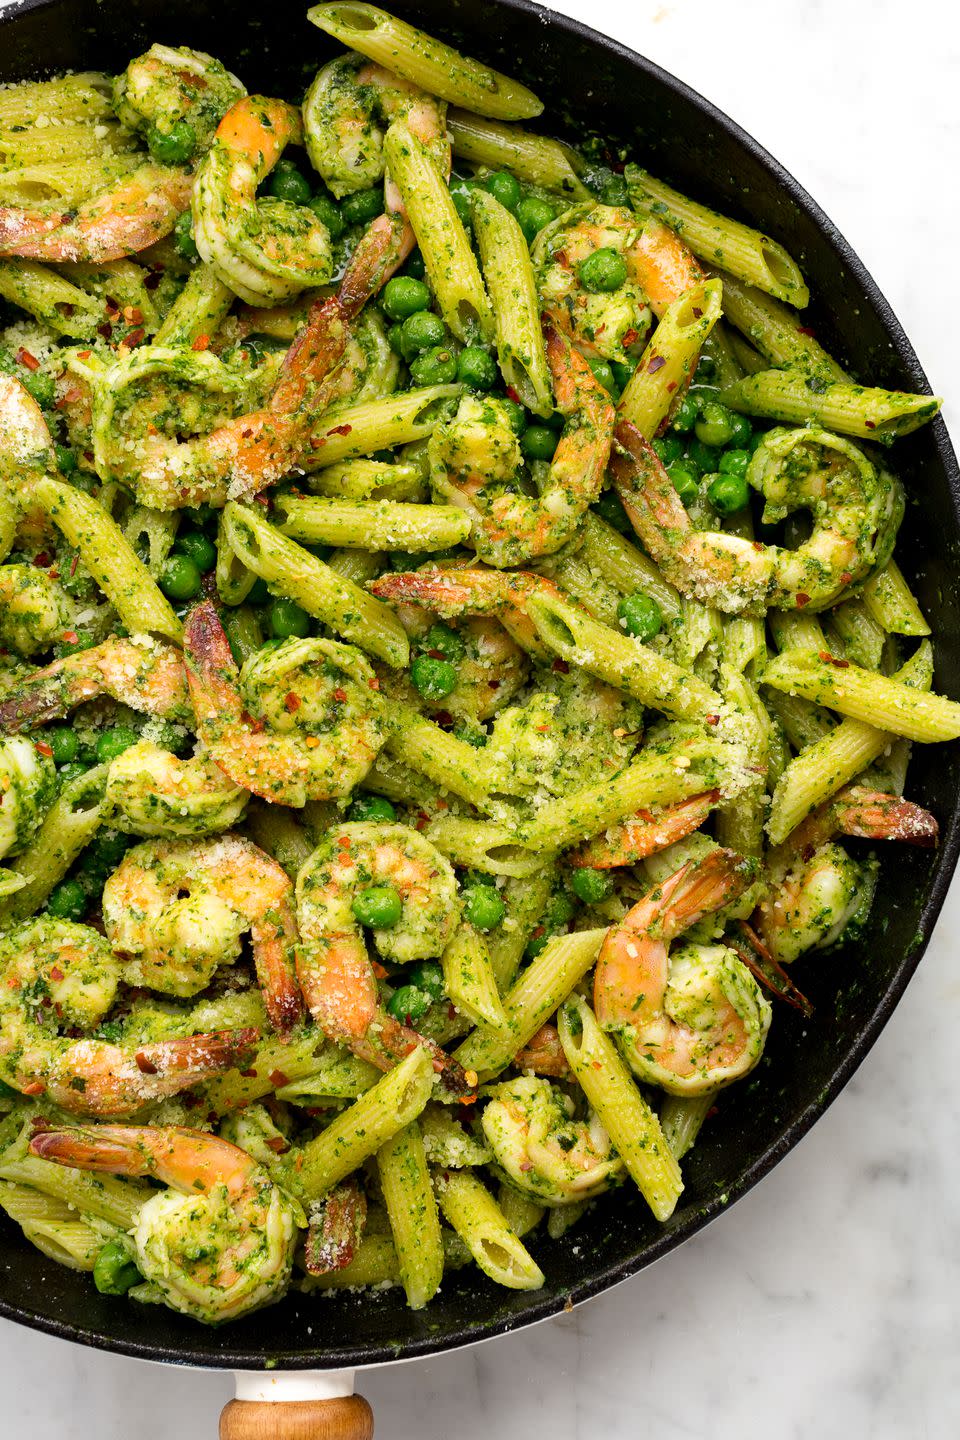 Spinach Pesto Penne with Shrimp and Peas